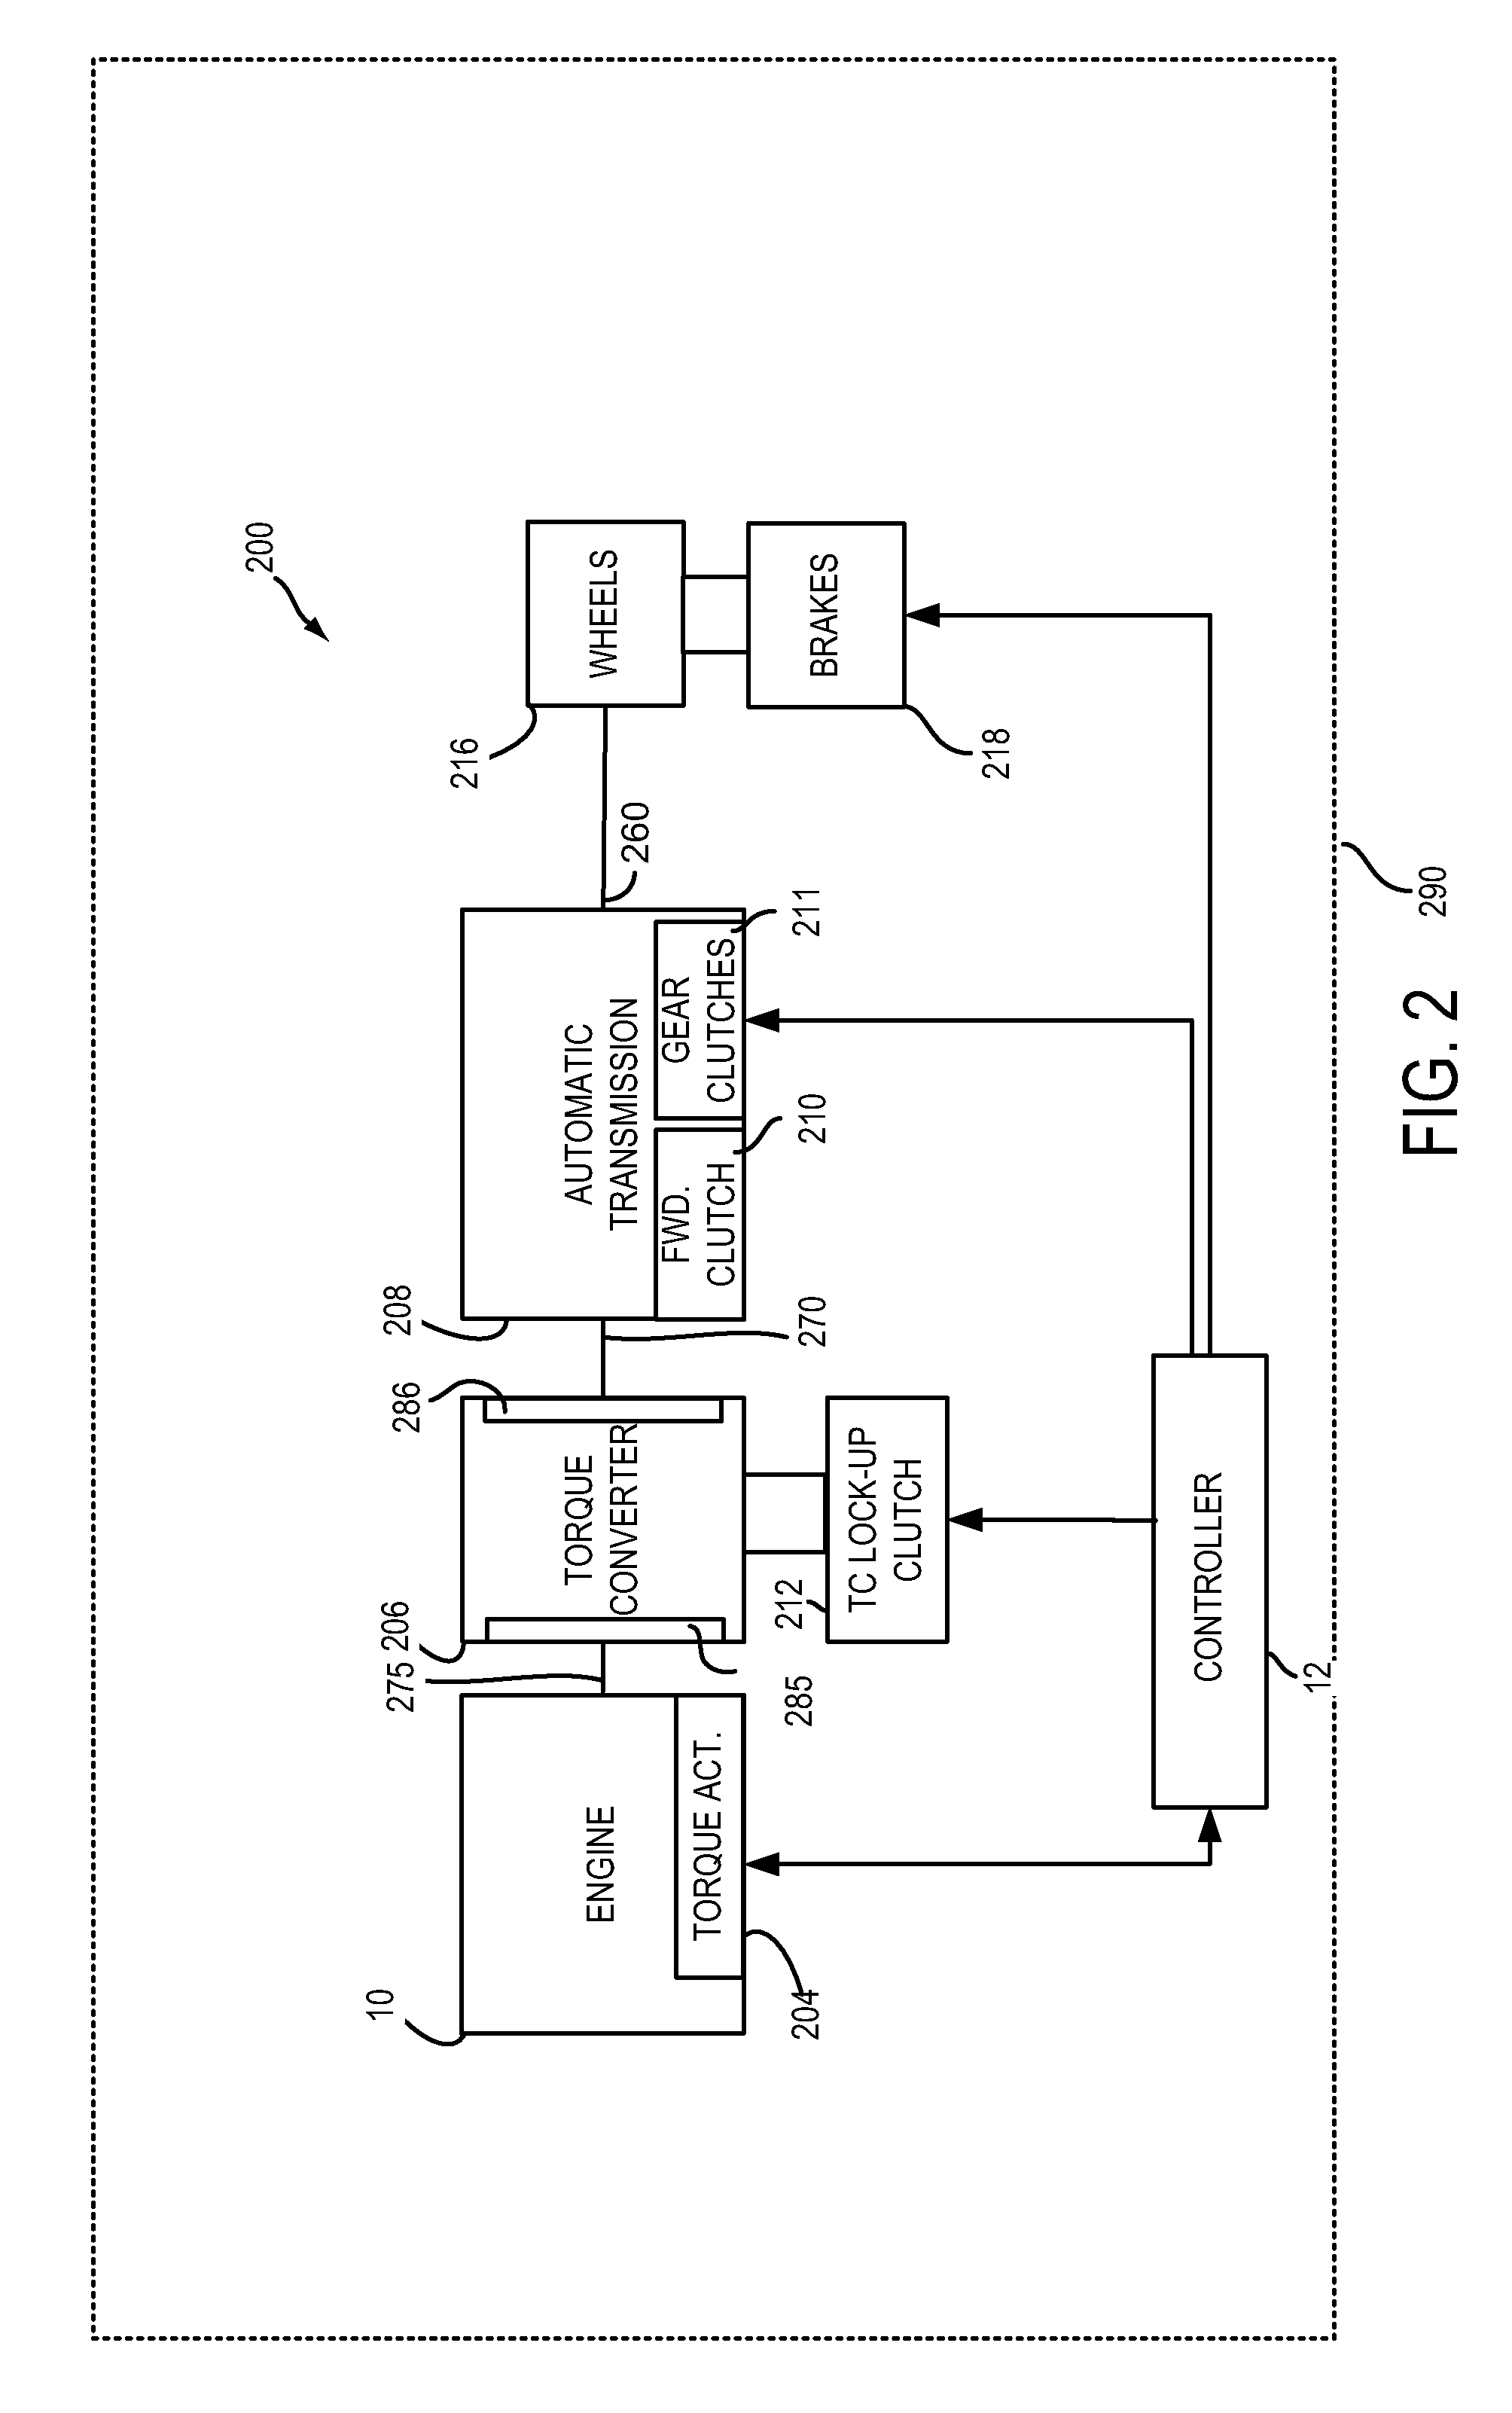 Systems and methods for improving torque response of an engine